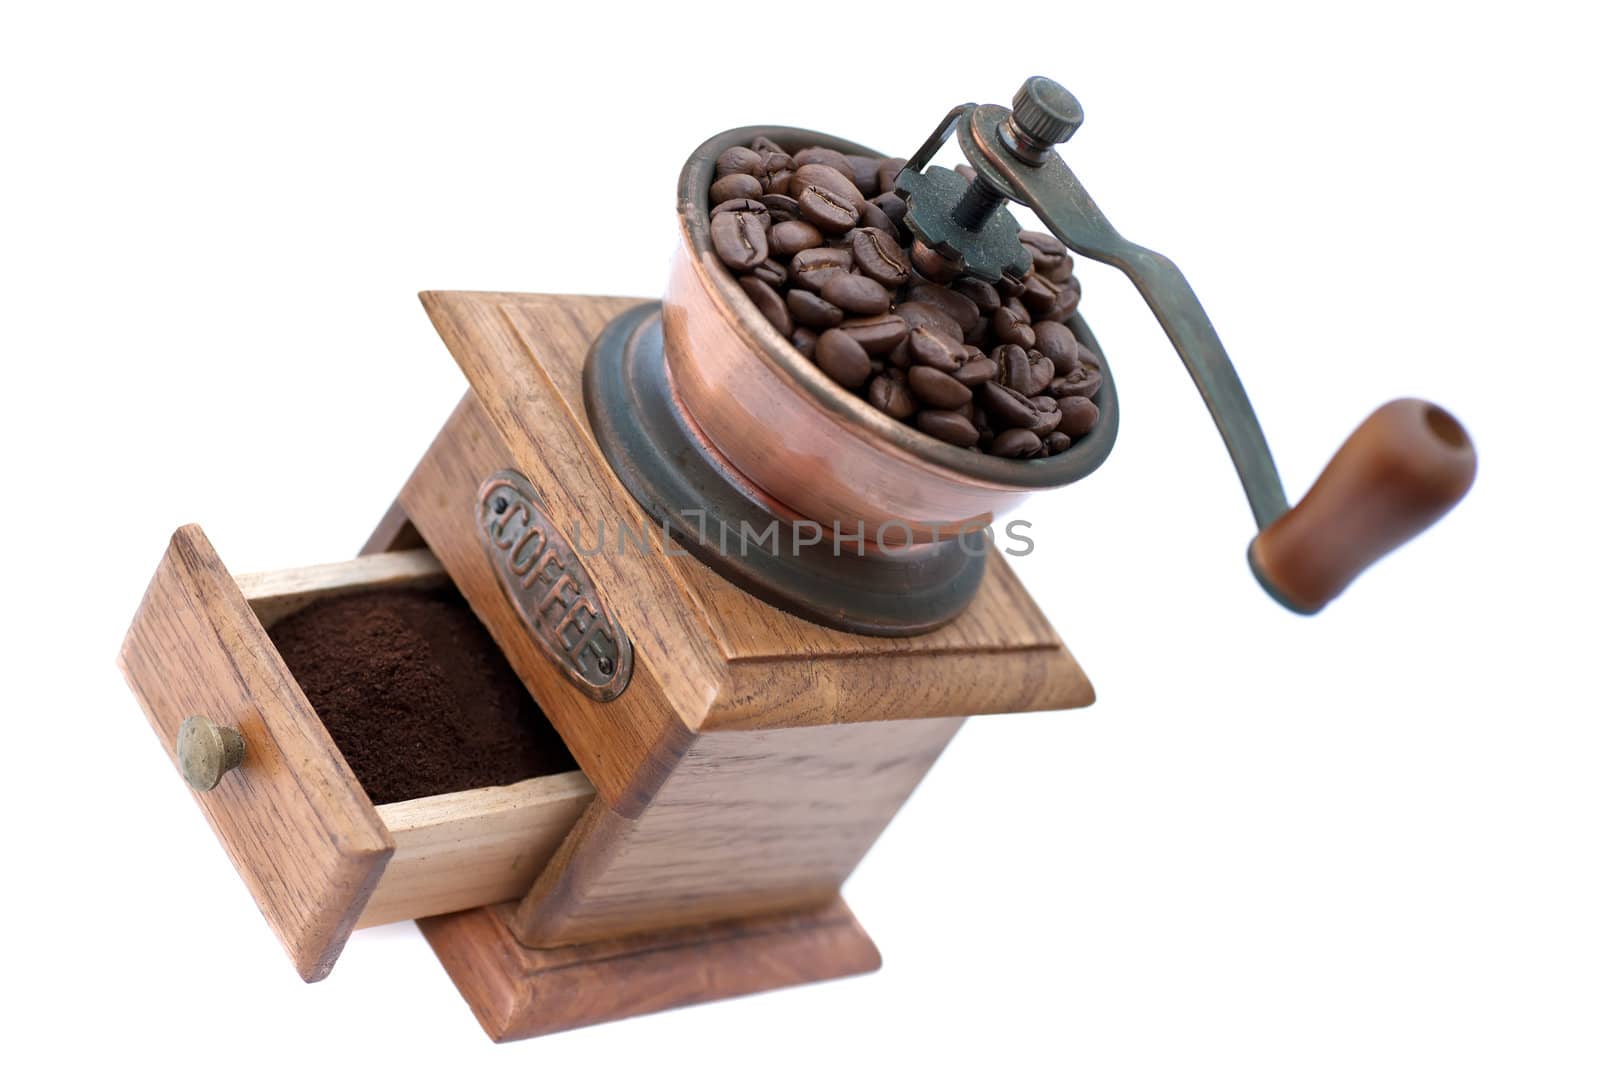 Coffee grinder and coffee beans by Marcus